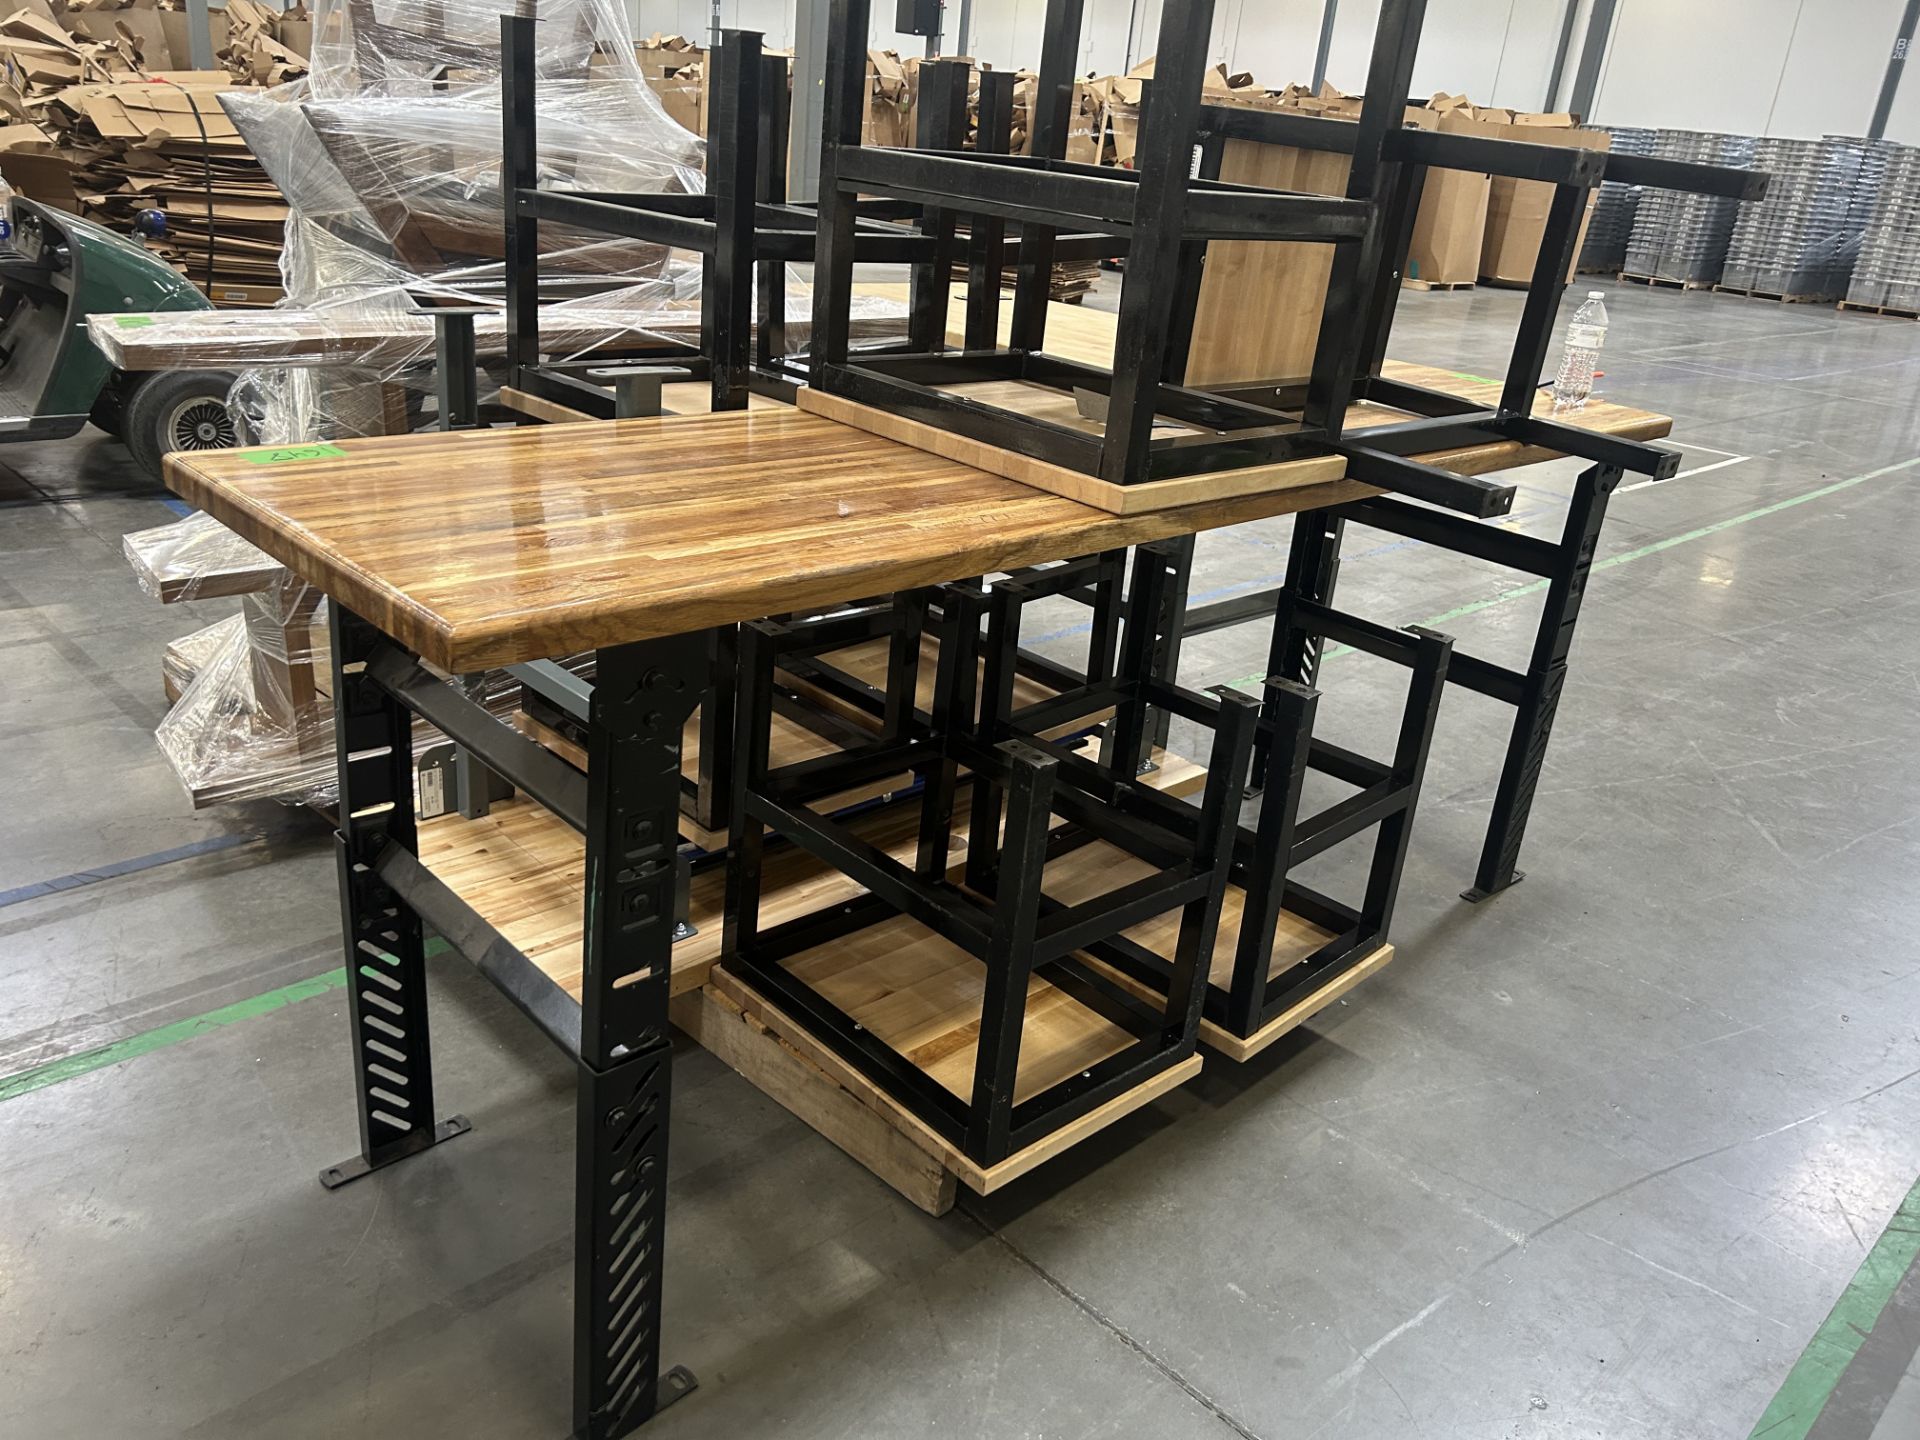 Butcher Block Tables, Work Tables and Cushion Top Chairs - Image 2 of 3